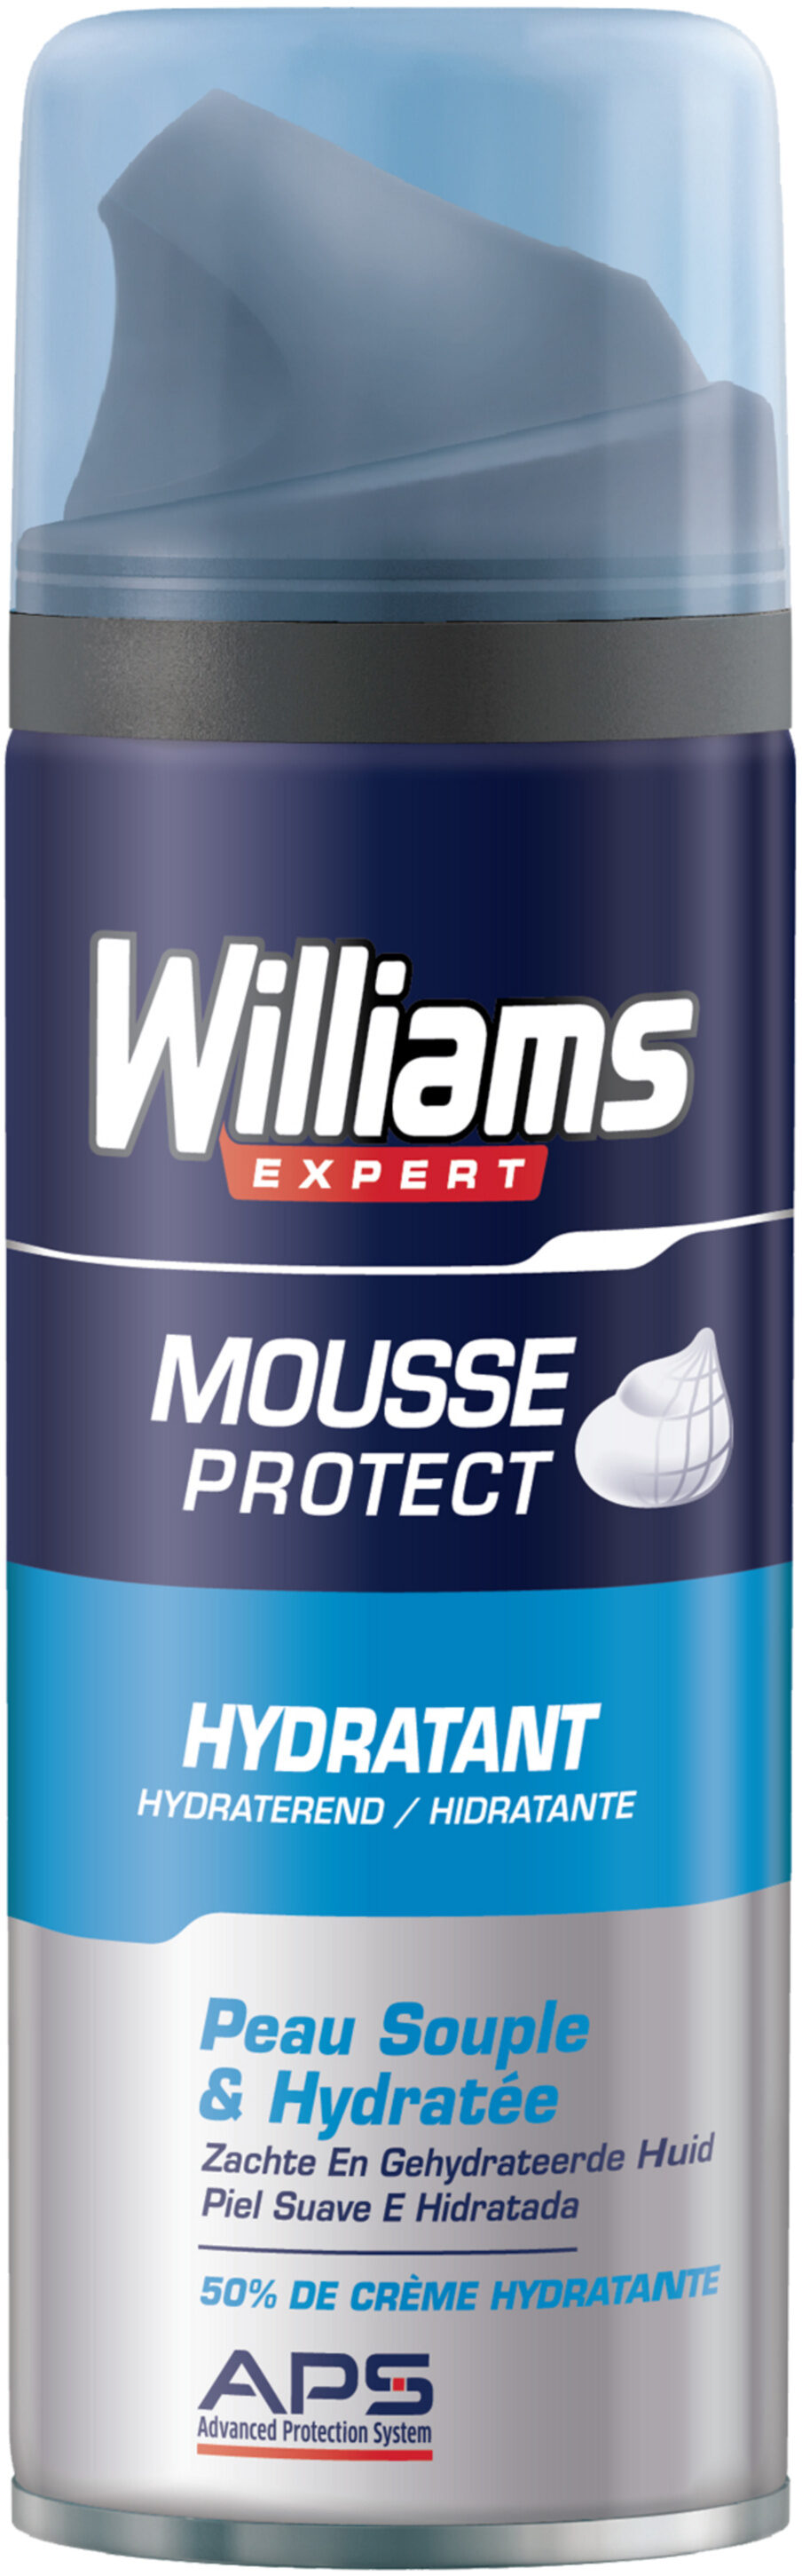 Williams Mousse à Raser Hydratant 200ml - Product - fr